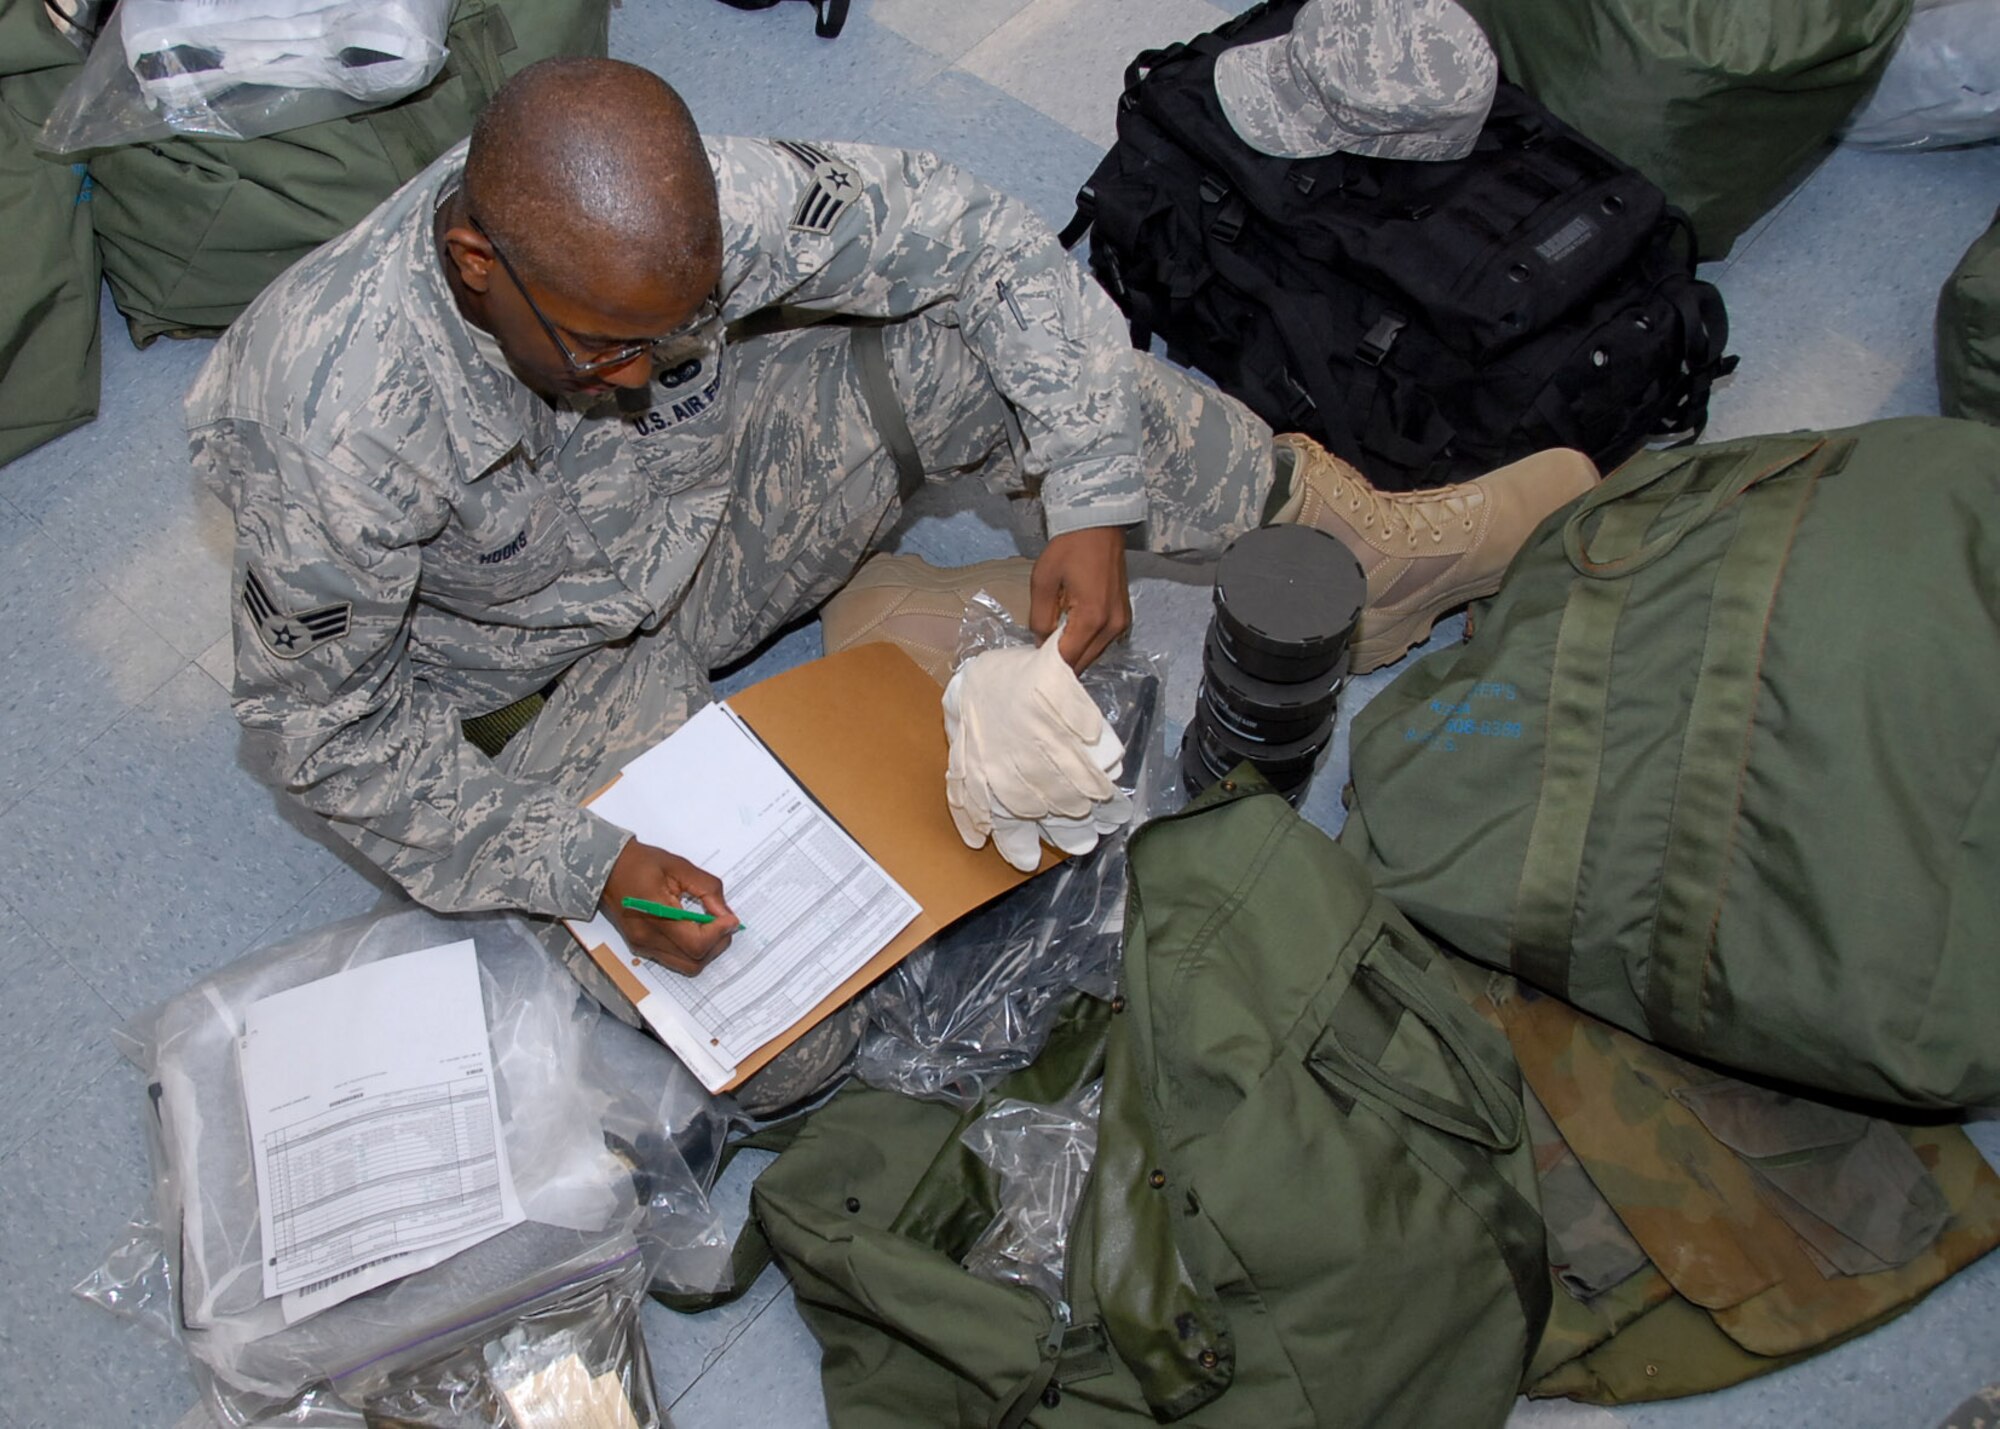 As part of the February base exercise, Senior Airman Larry Hooks of the Lemay Center checks the inventory of his “C” bag Wednesday. Each bag contains protective items in the event of a chemical attack. Airman Hooks was required to inspect his gear in a “deployment line” as the base exercised its mobility machine for actual deployments. (Air Force photo by Jamie Pitcher)